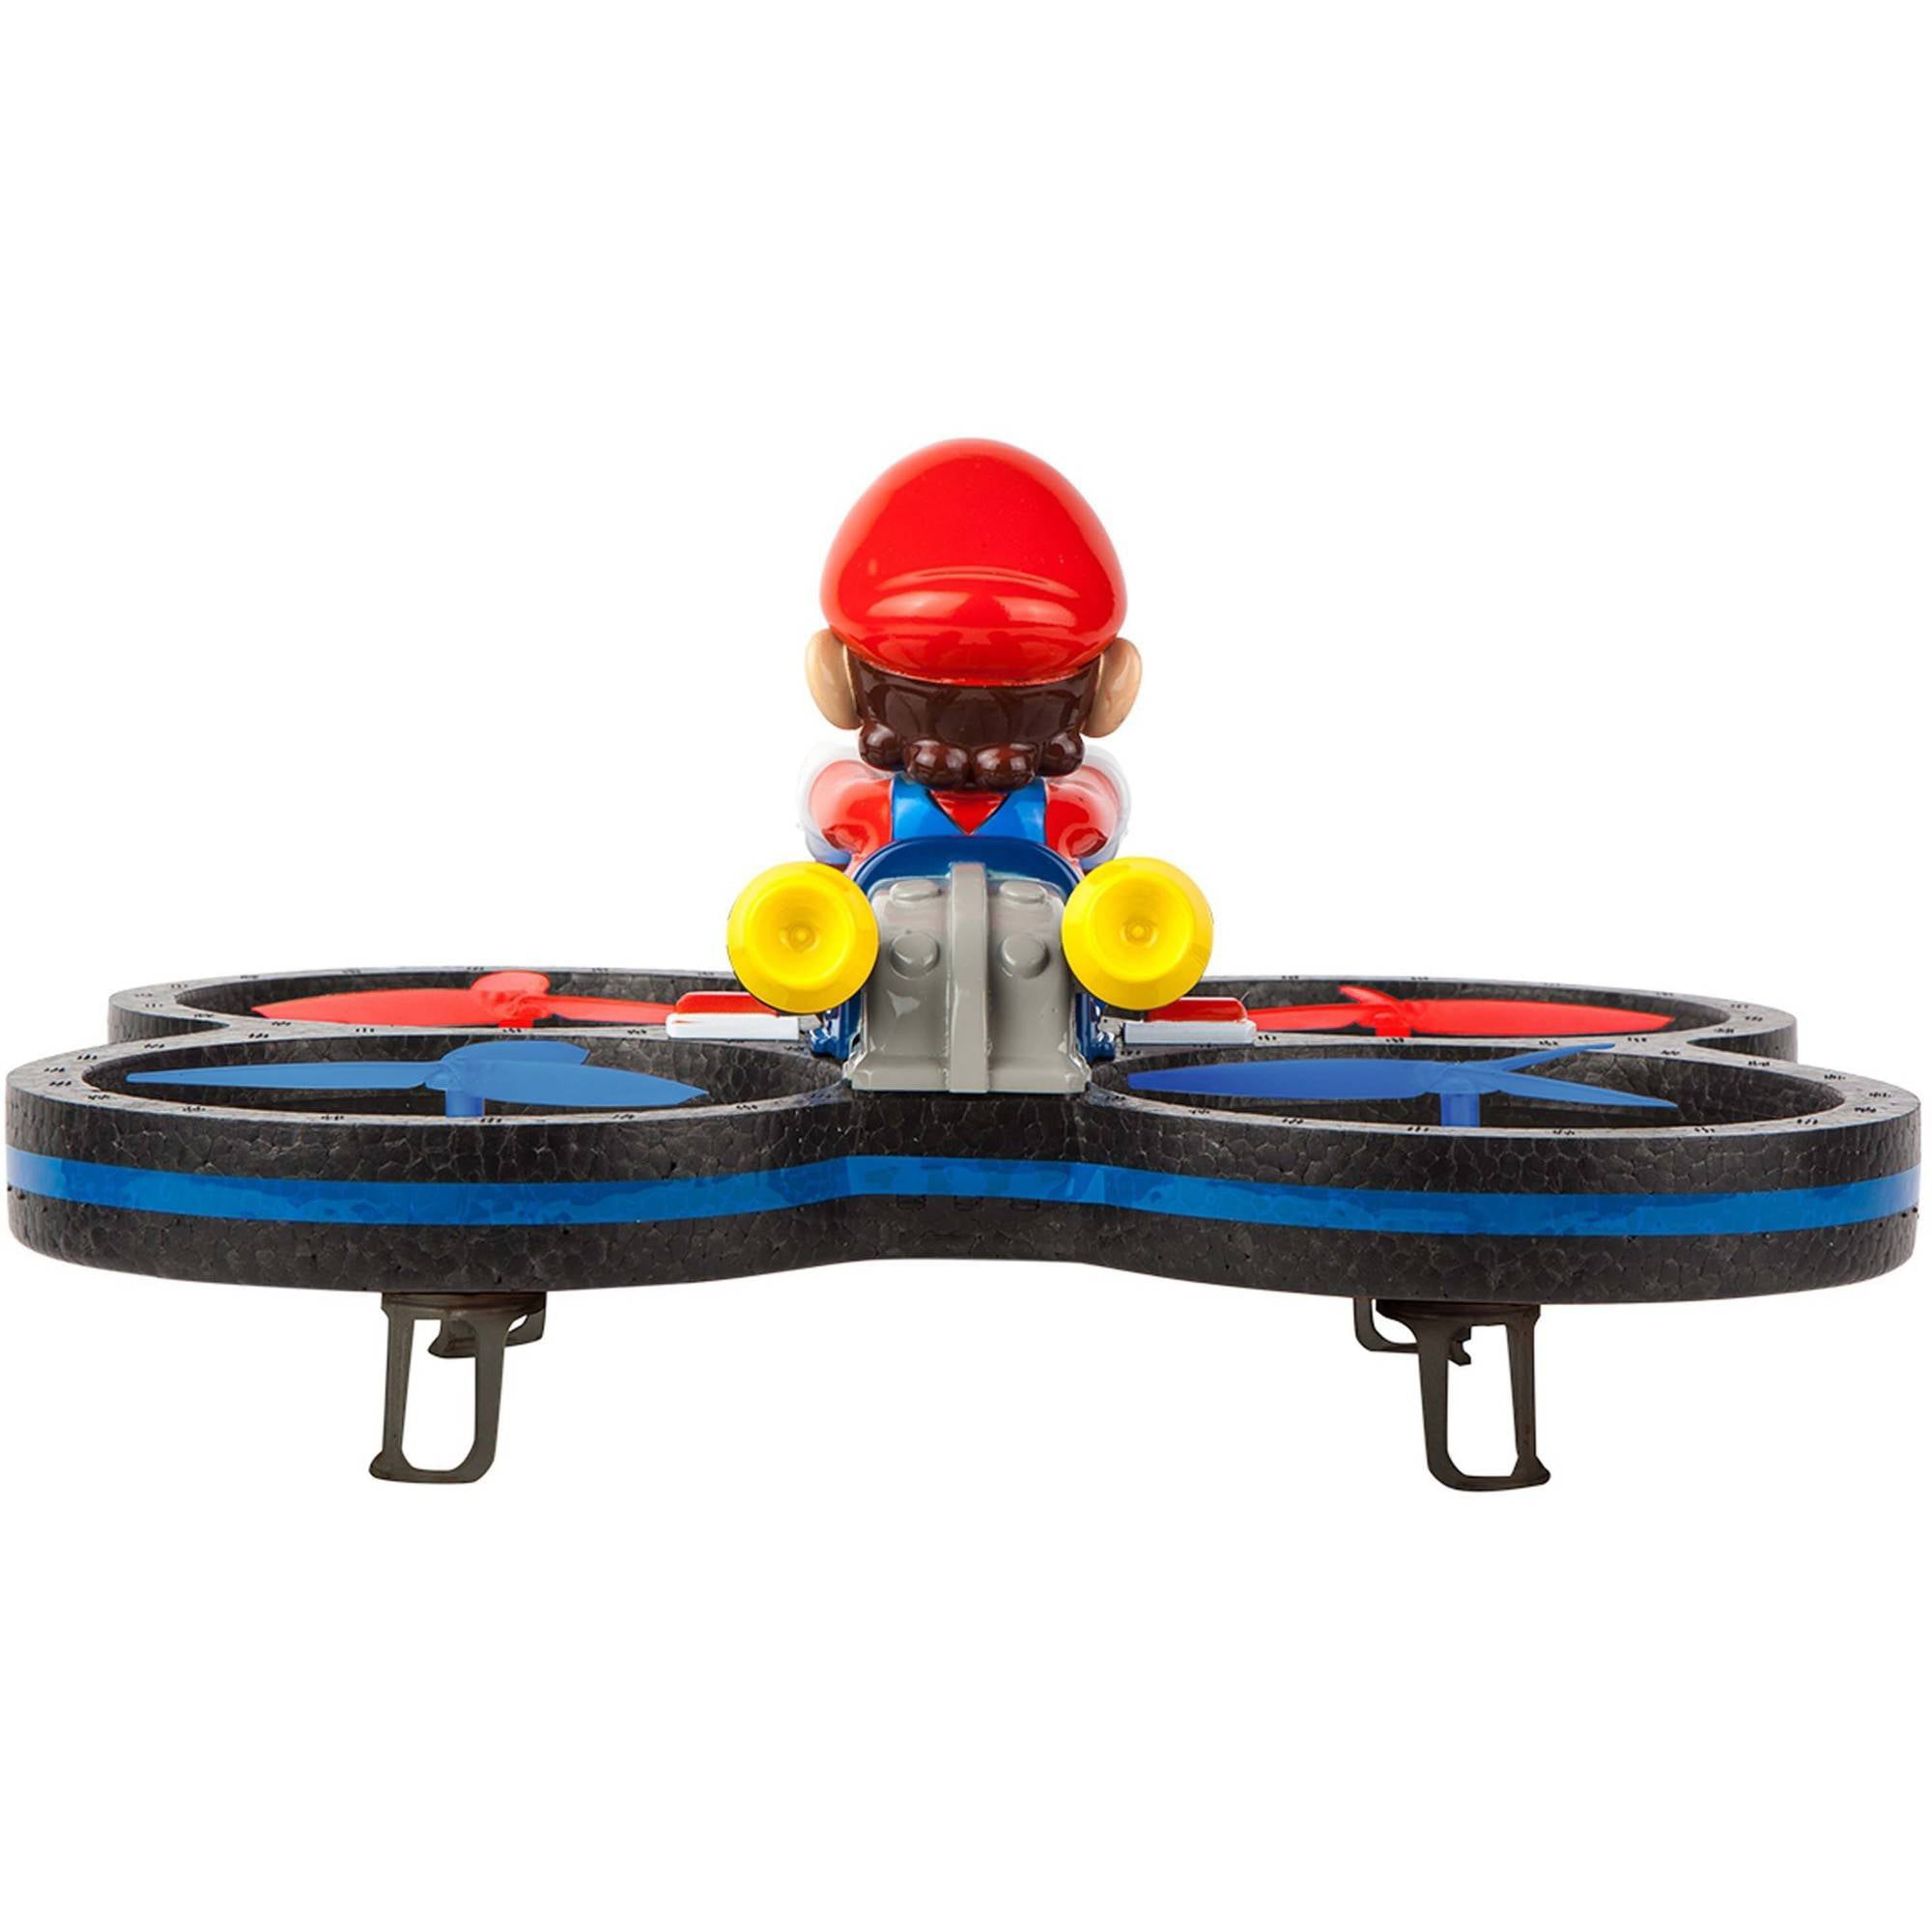 Carrera RC Nintendo Mario-Copter 2.4 GHz 4-Channel Vehicle